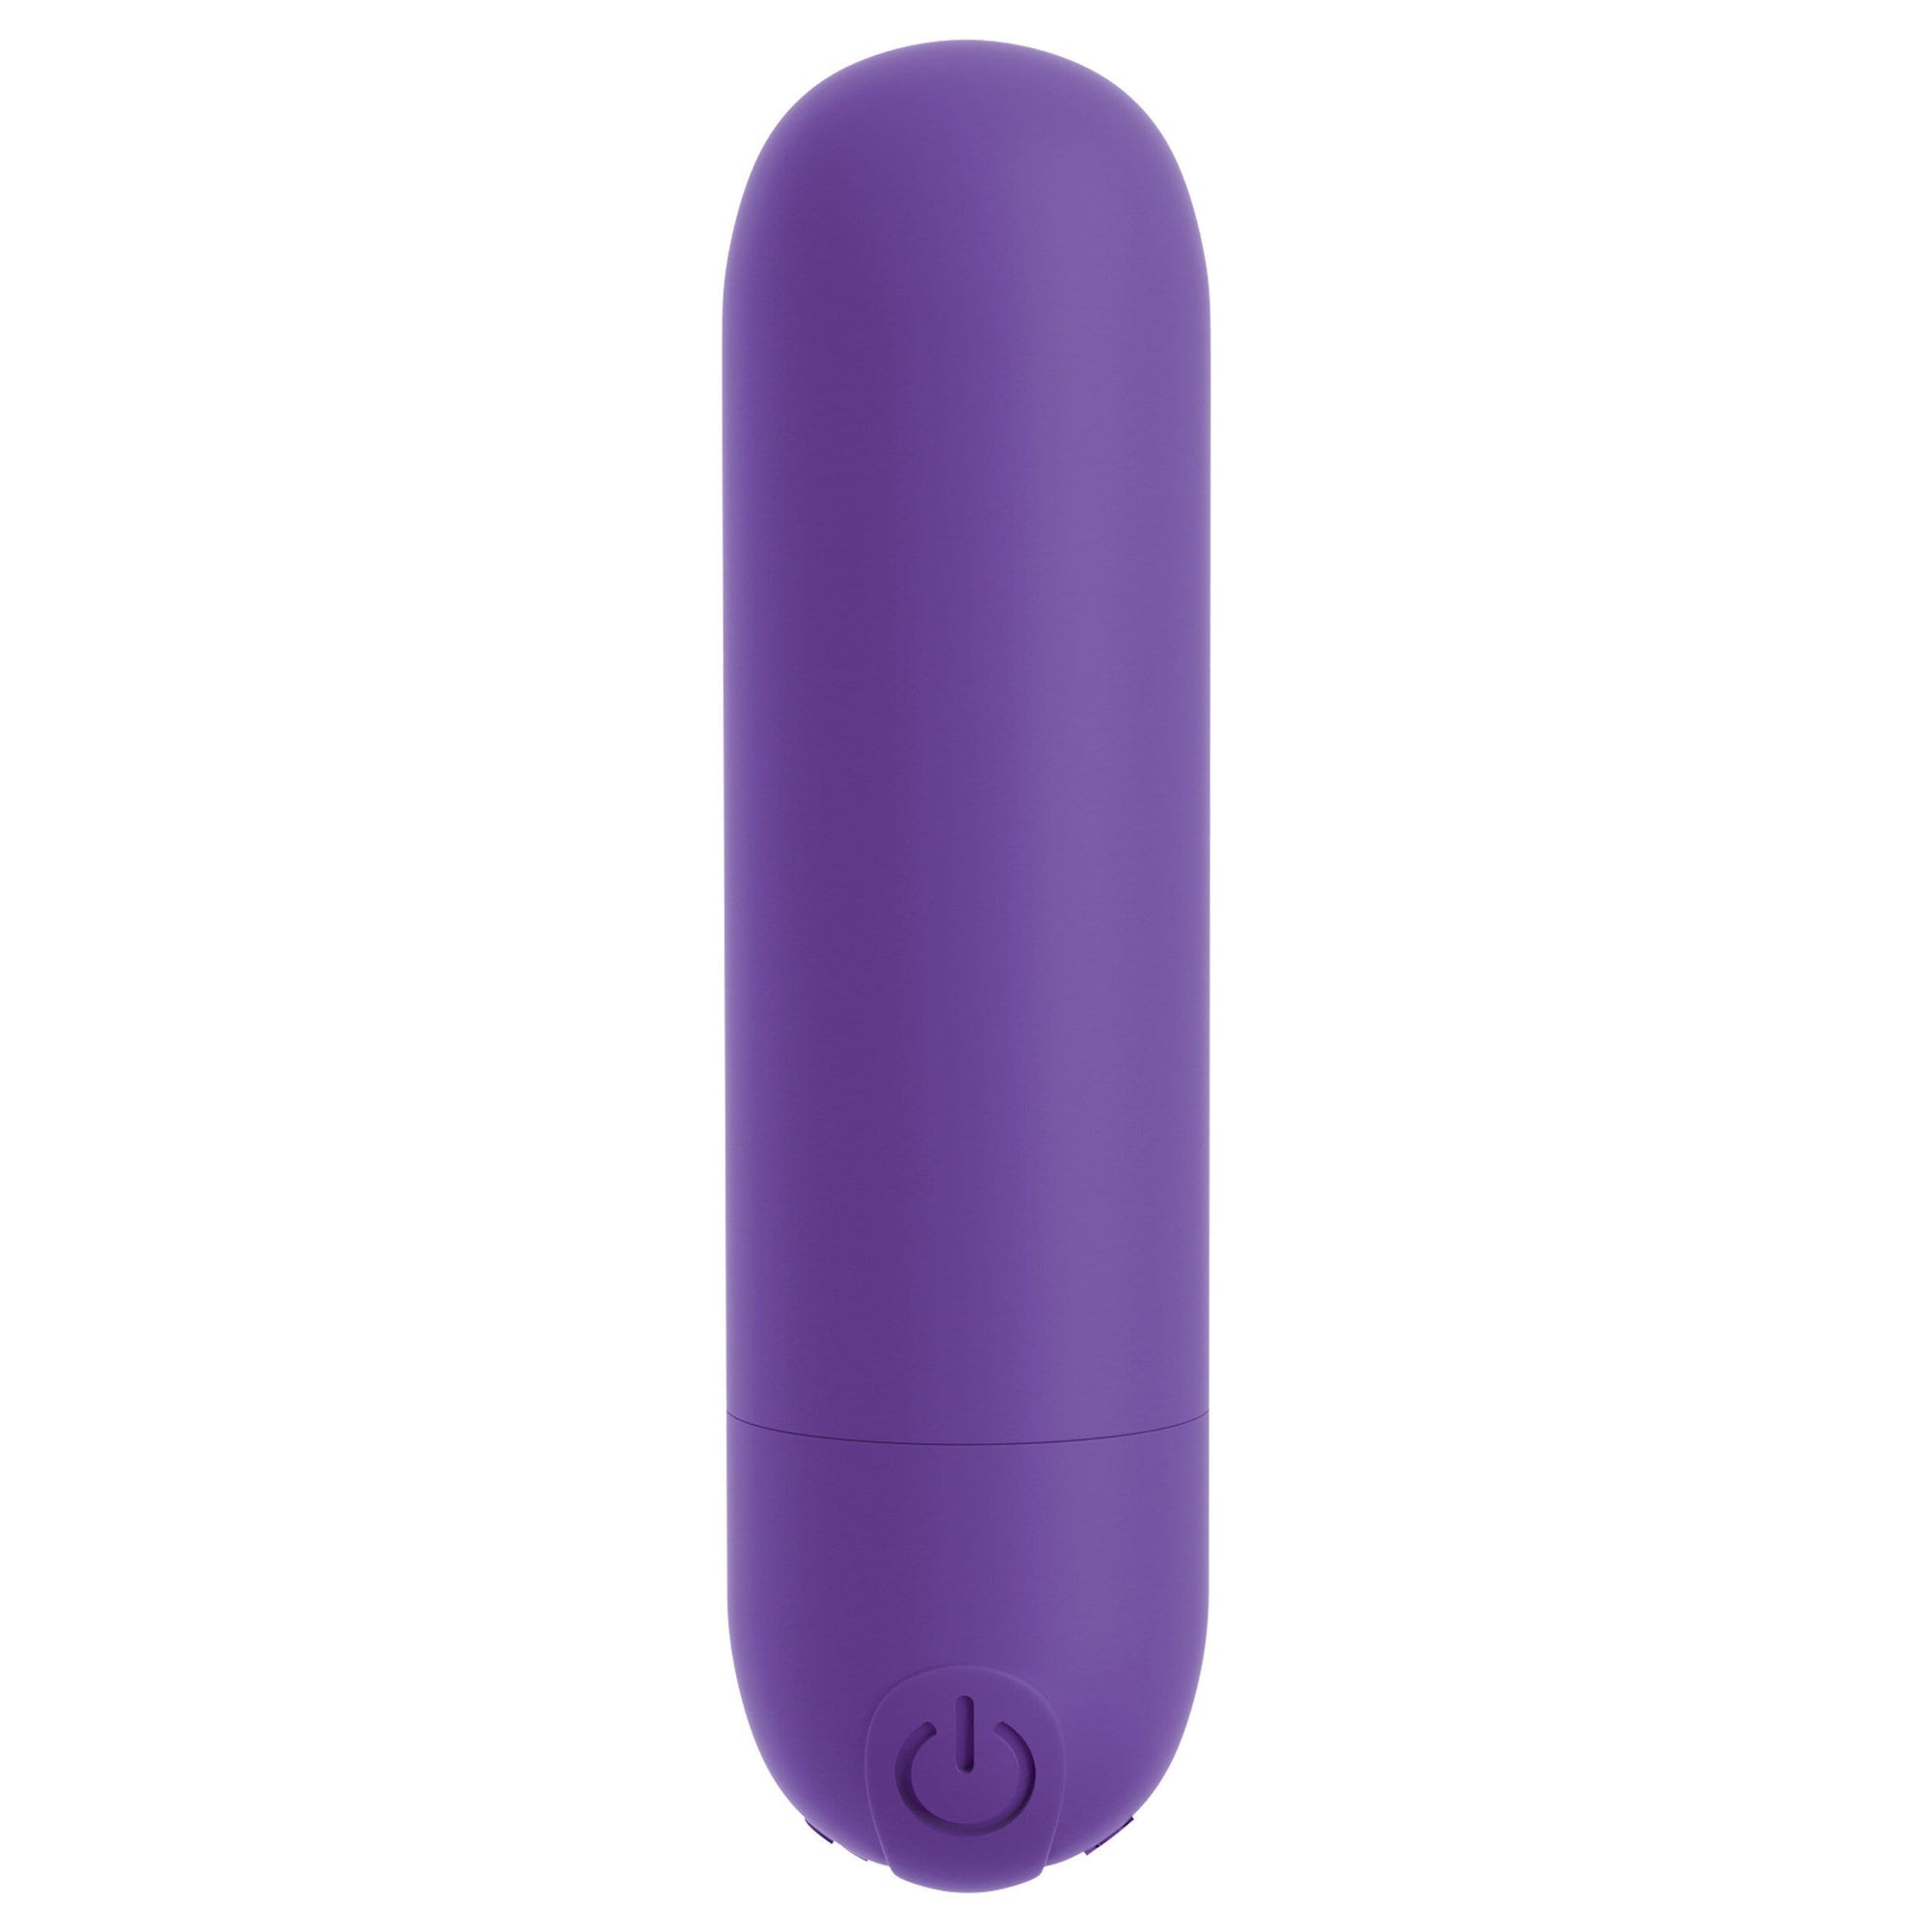 Pipedream - OMG Bullets #Play Rechargeable Bullet Vibrator (Purple) Bullet (Vibration) Rechargeable 319767160 CherryAffairs